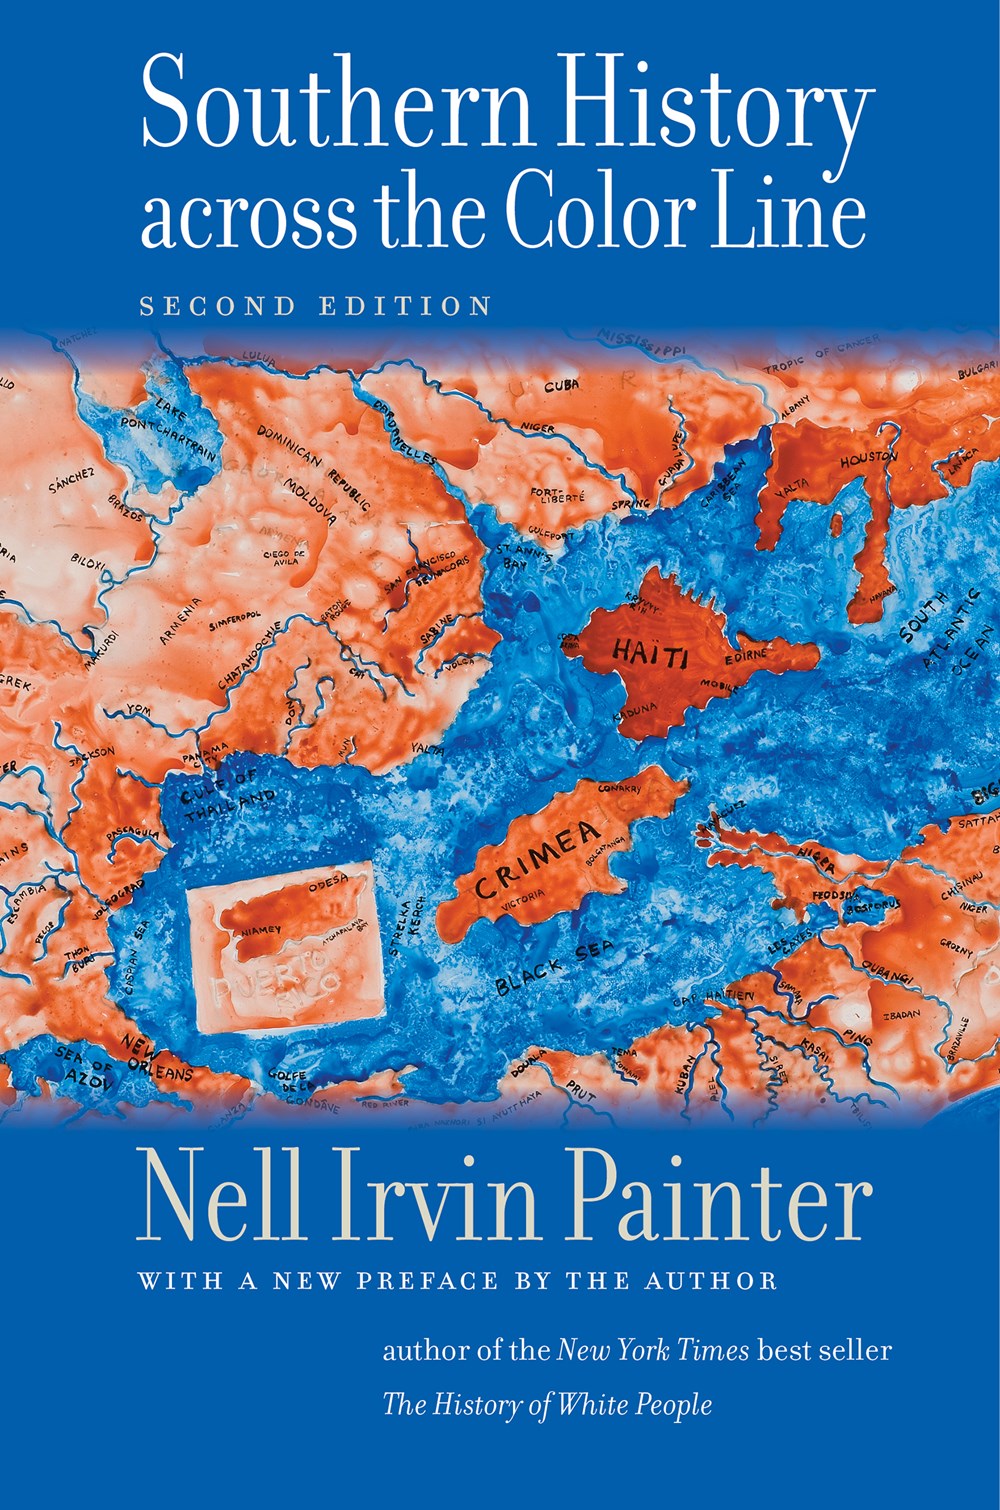 Southern History across the Color Line (2nd Edition)